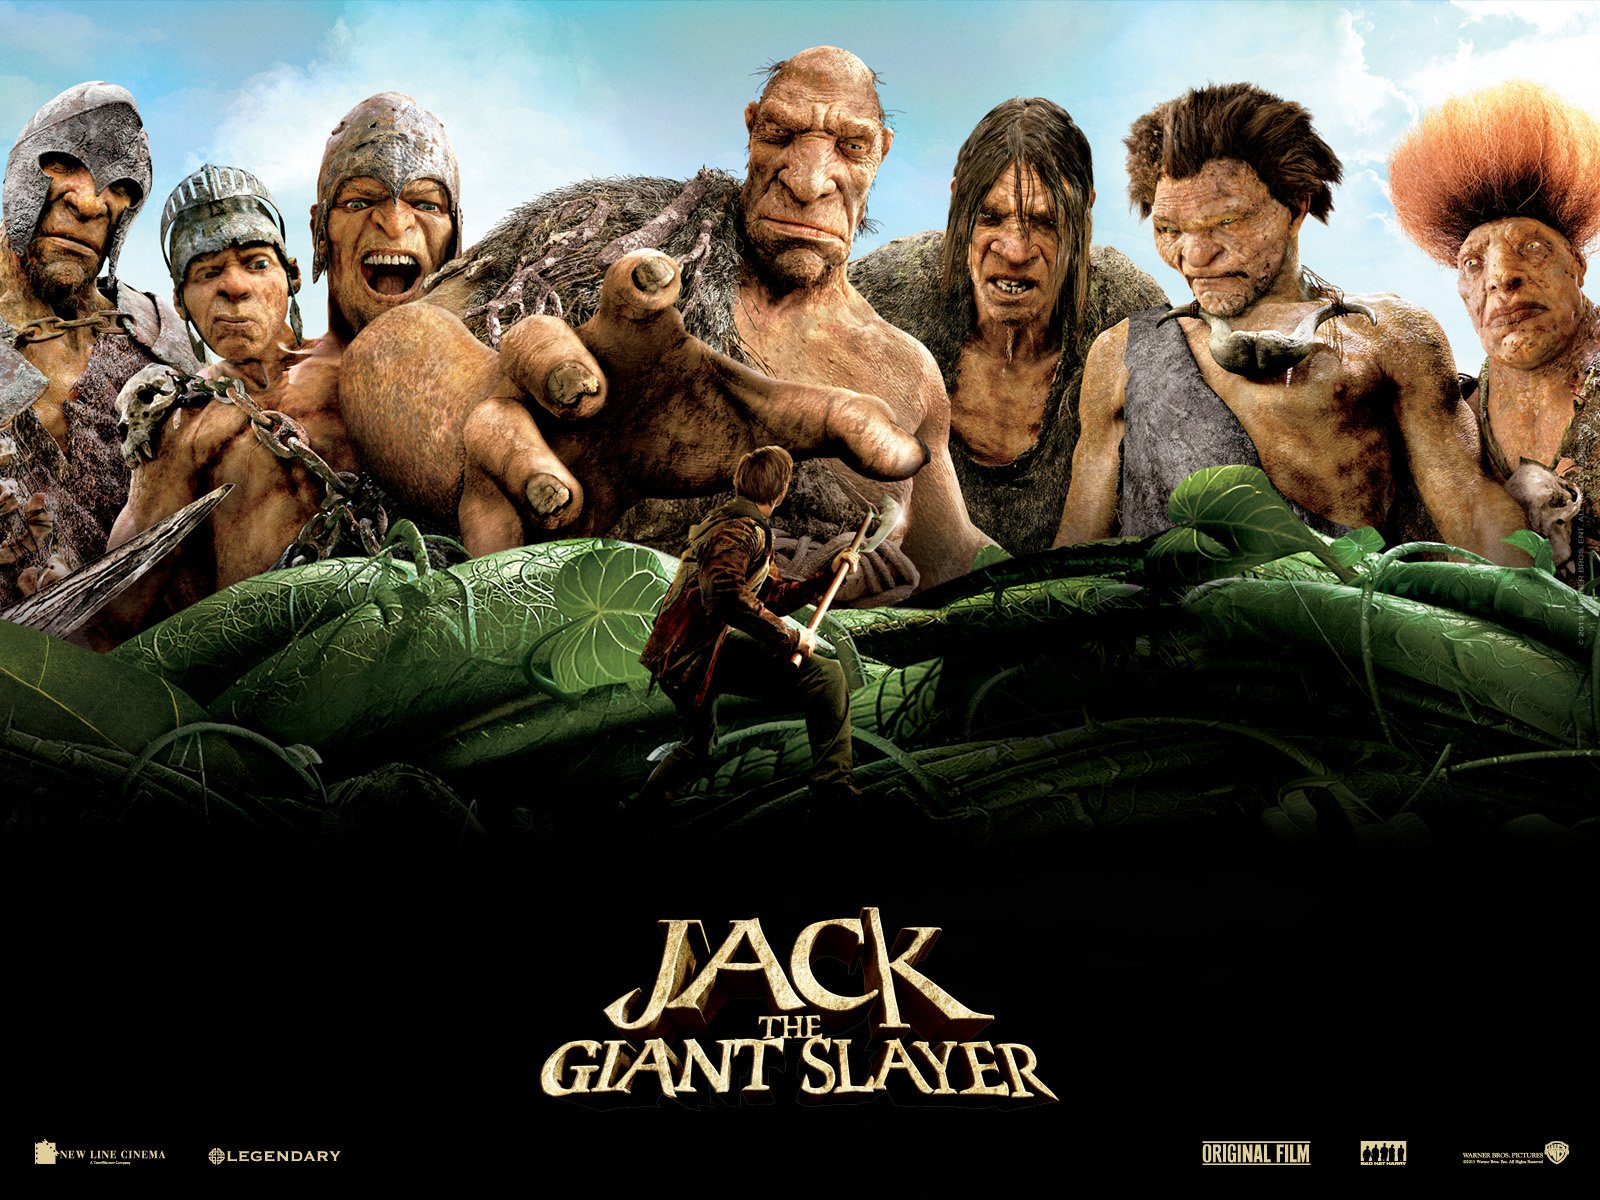 Jack The Giant Slayer Backgrounds, Compatible - PC, Mobile, Gadgets| 1600x1200 px